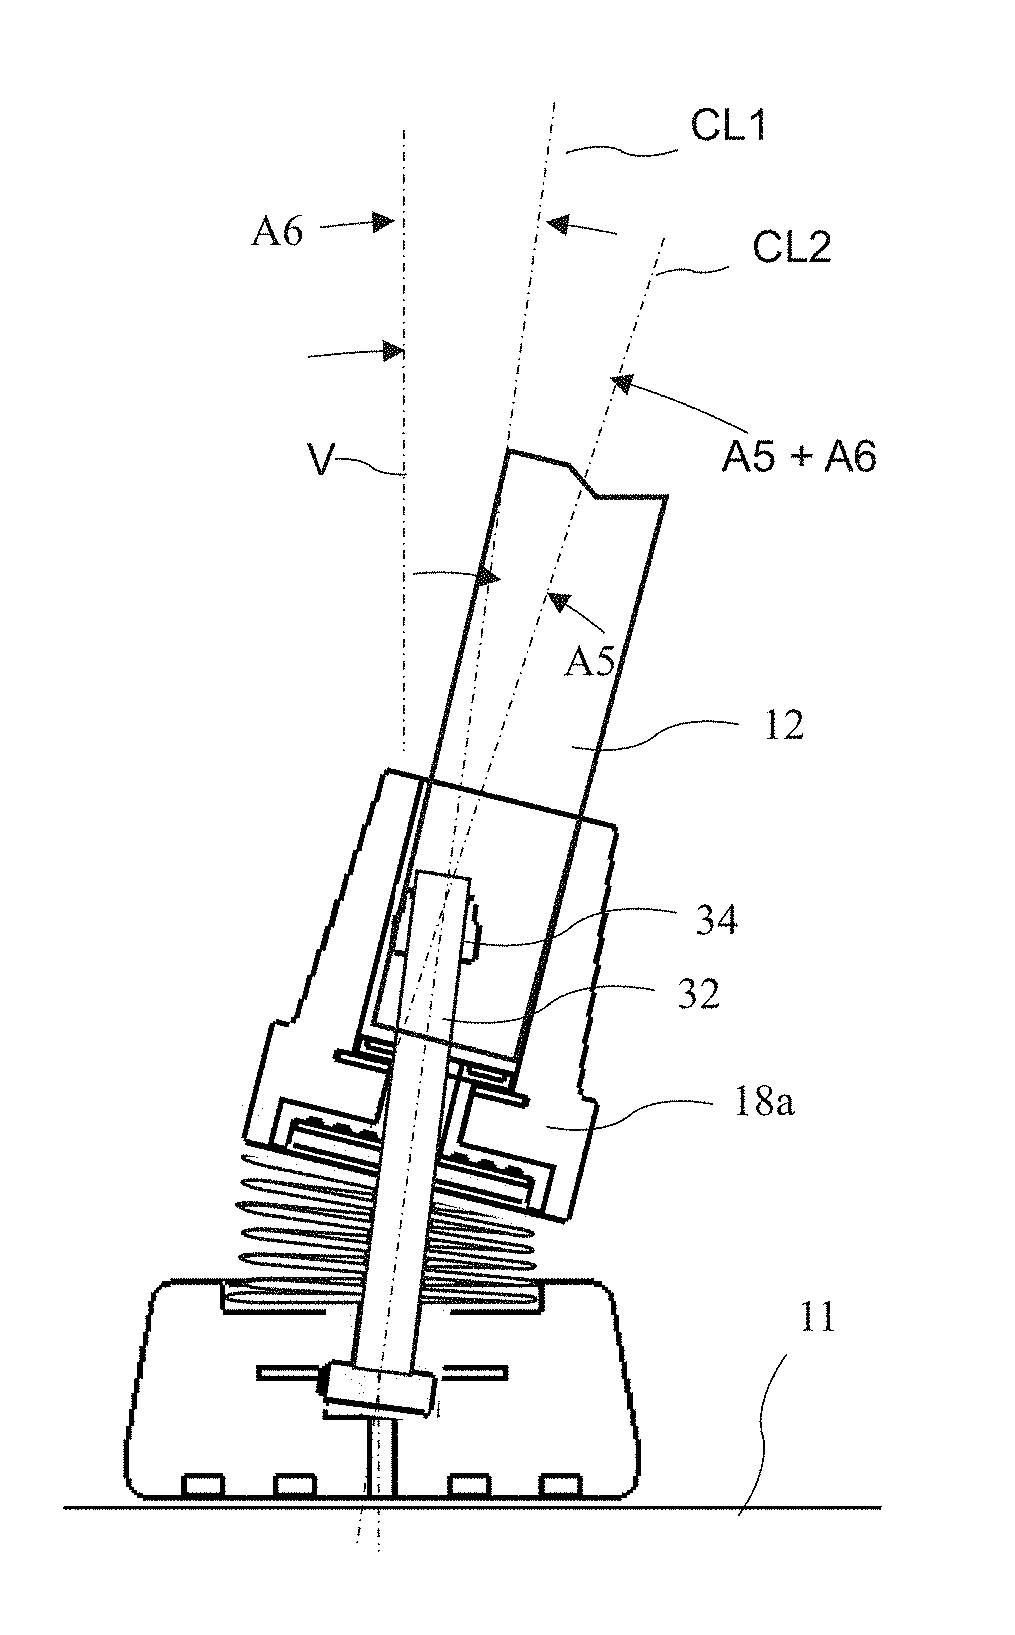 Adaptive pivoting and impact reduction tip assembly for walking aids